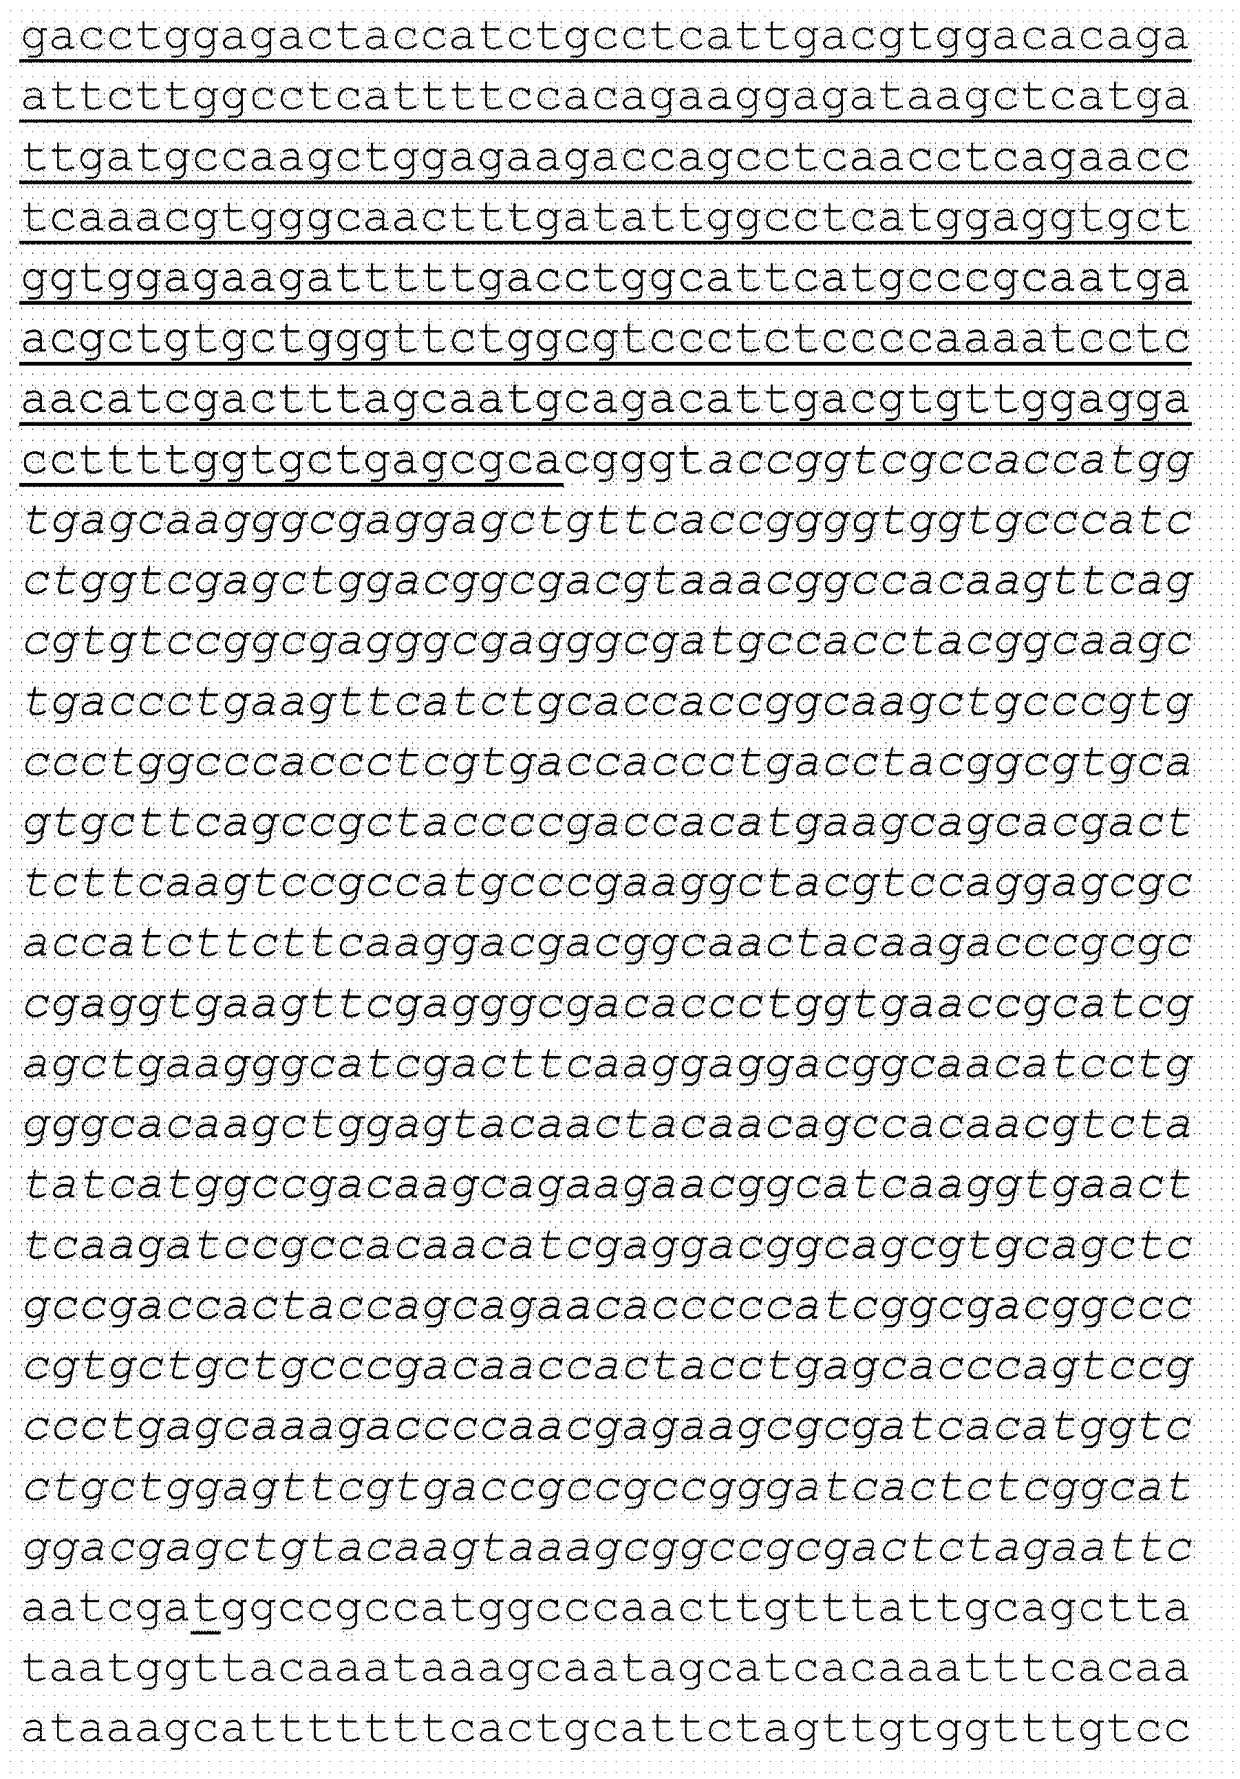 Variant of bpifb4 protein